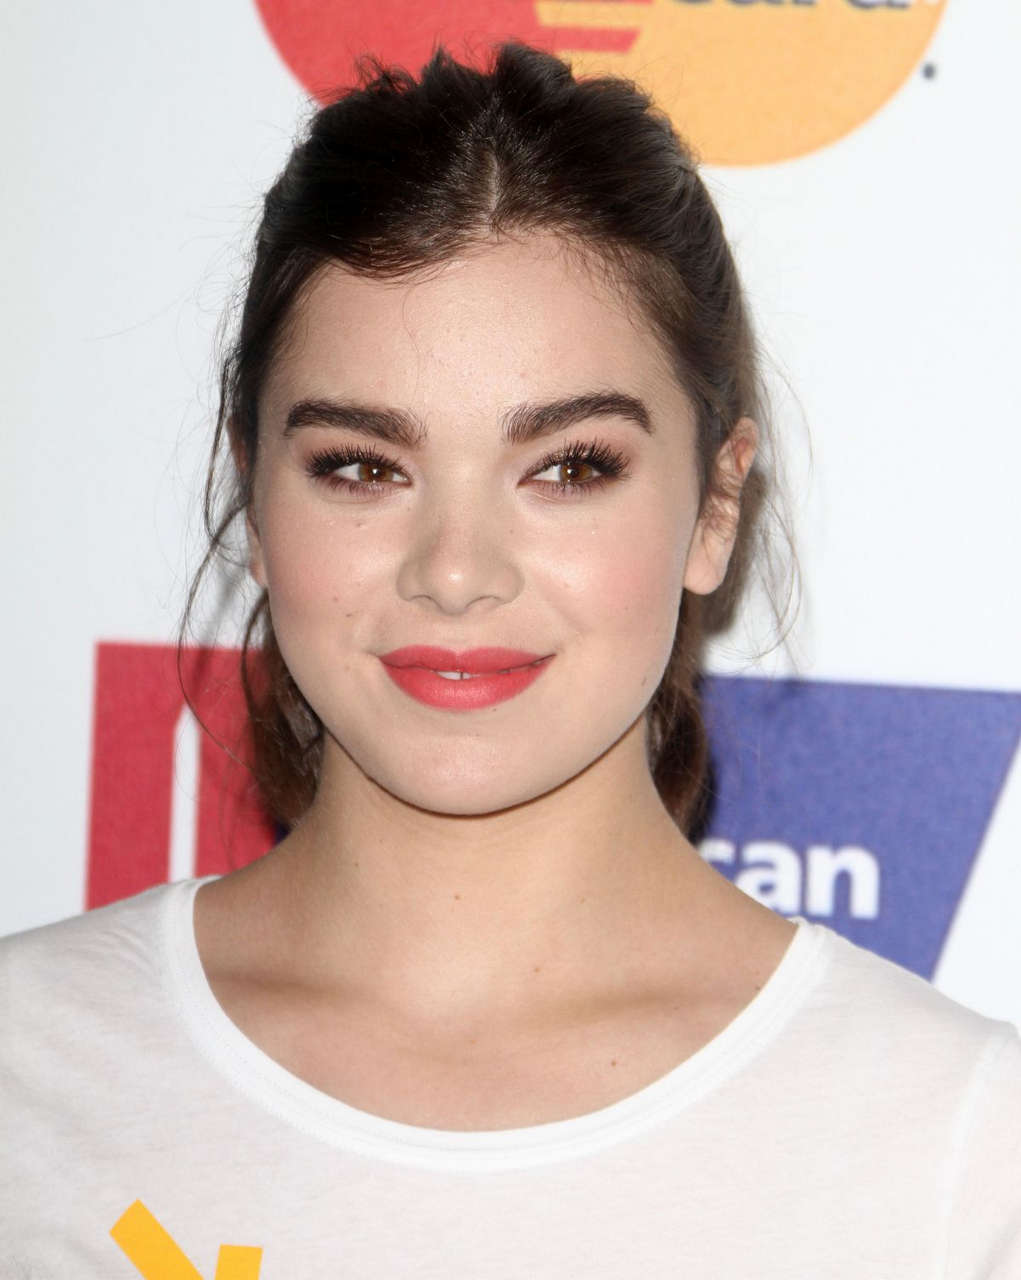 Hailee Steinfeld Stand Up 2 Cancer Live Benefit Hollywood